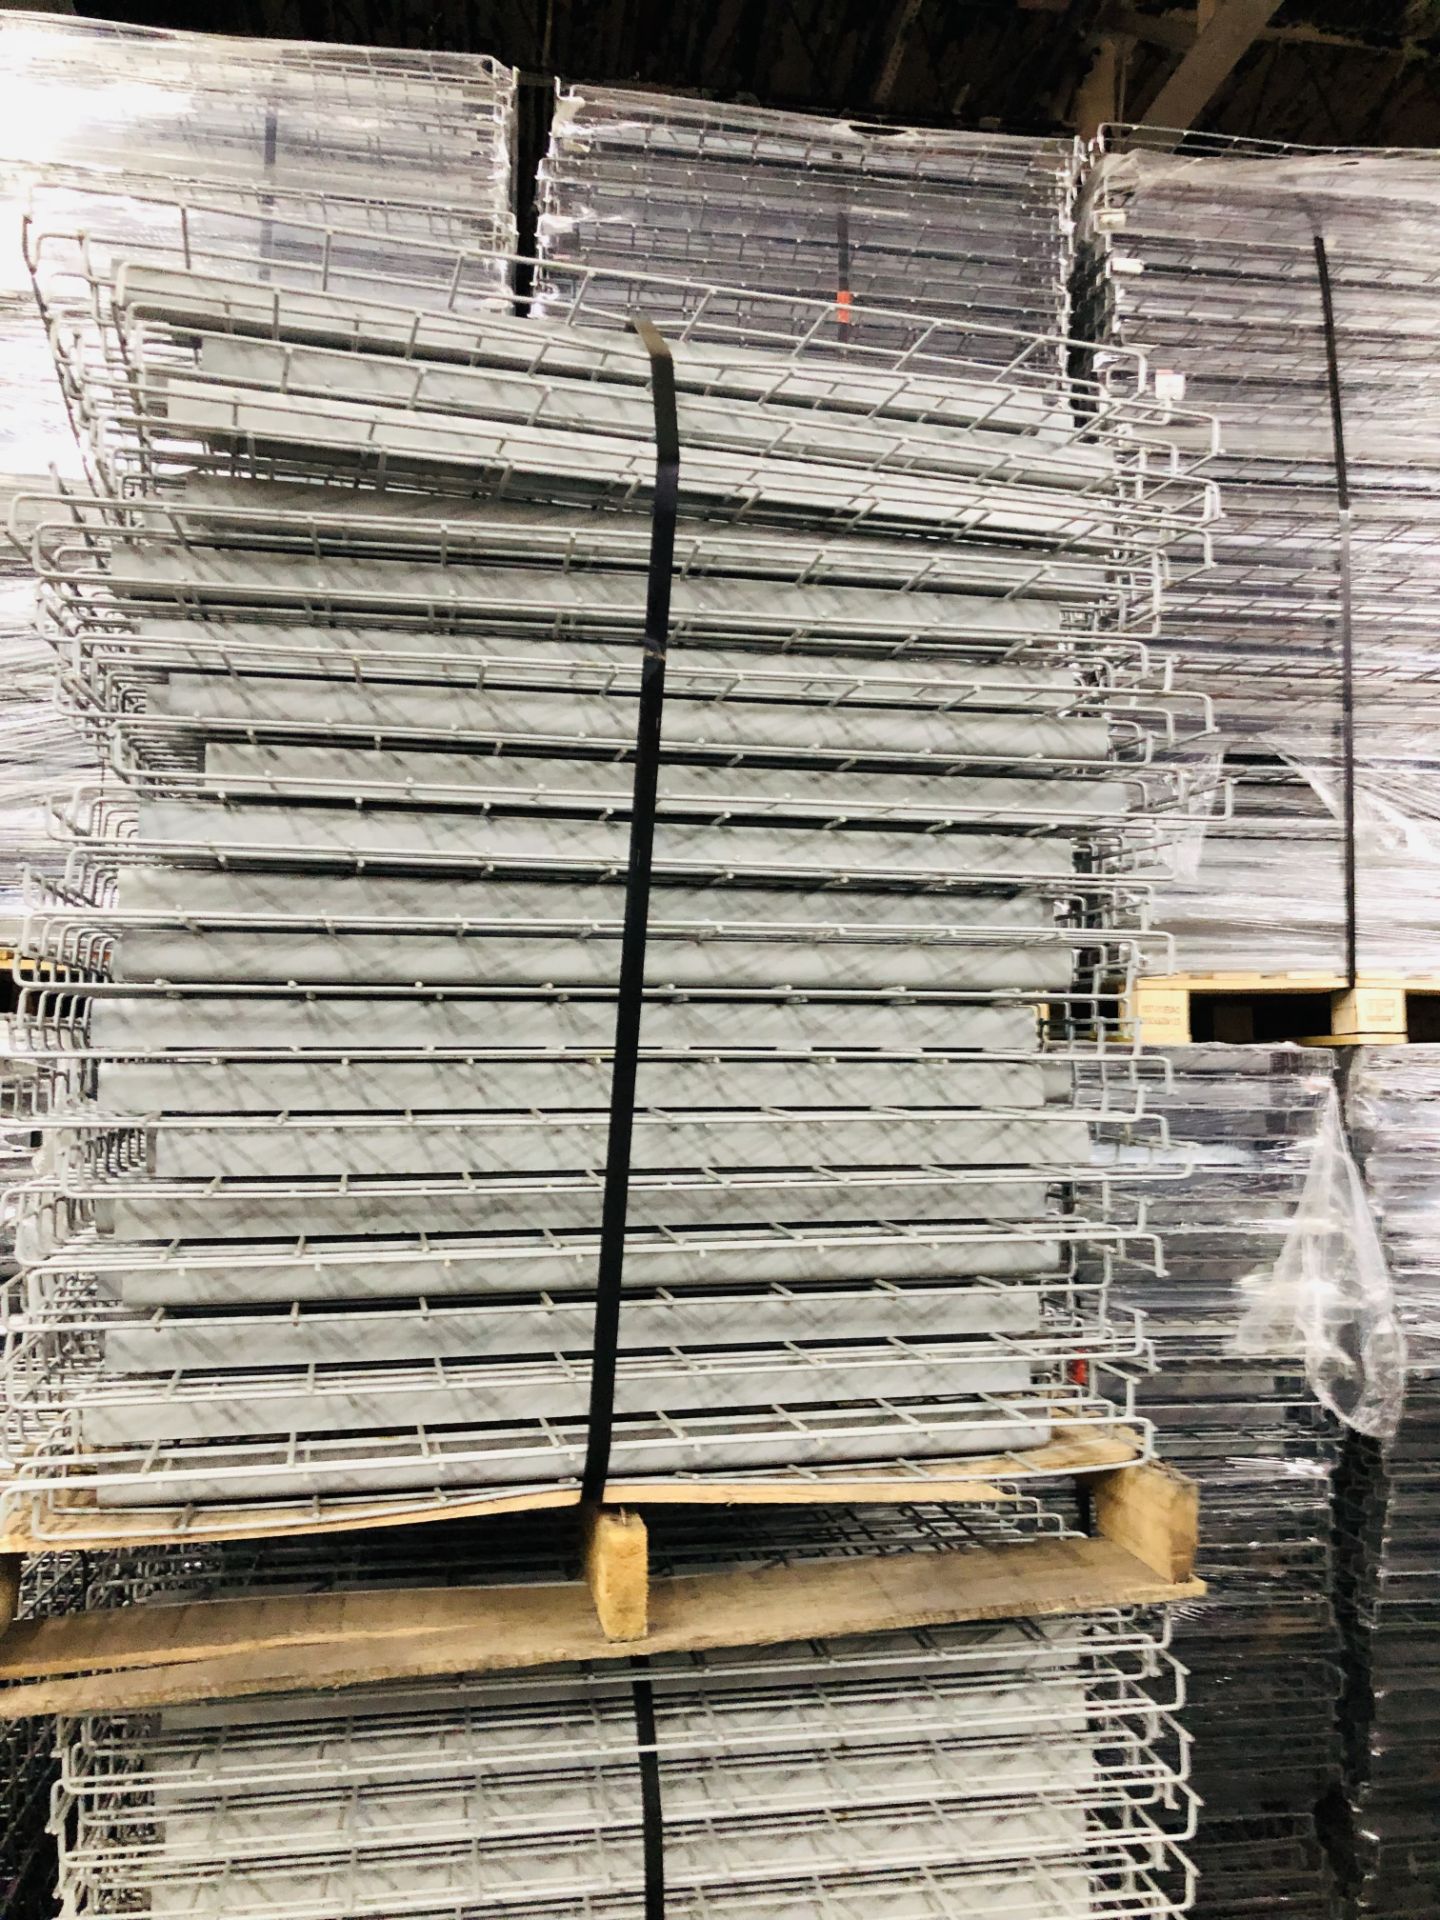 USED 80 PCS OF STANDARD 48" X 46" WIREDECK